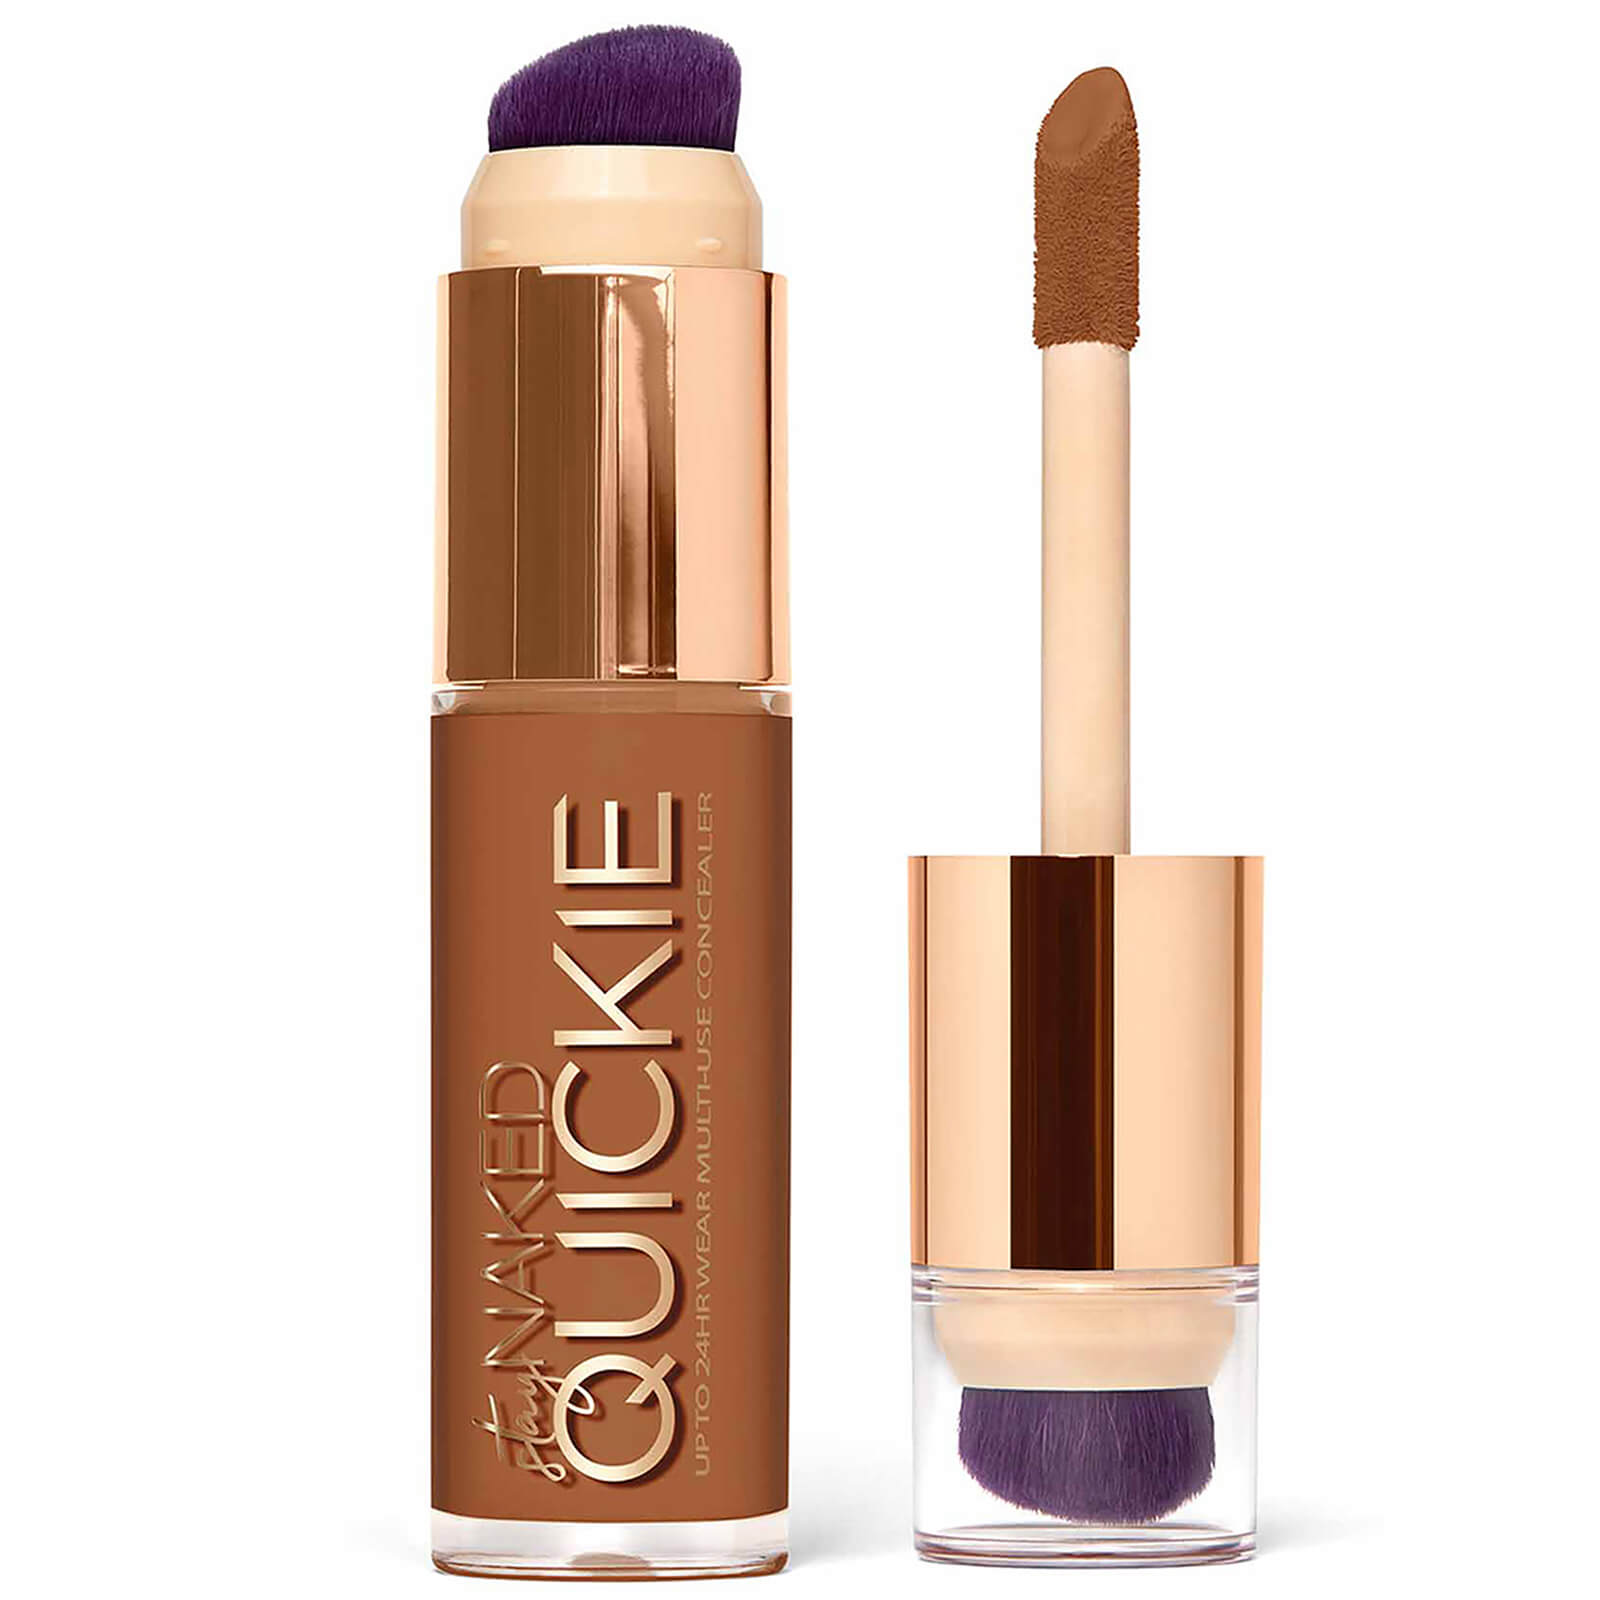 Urban Decay Stay Naked Quickie Concealer 16.4ml (Various Shades) - 70NN von Urban Decay